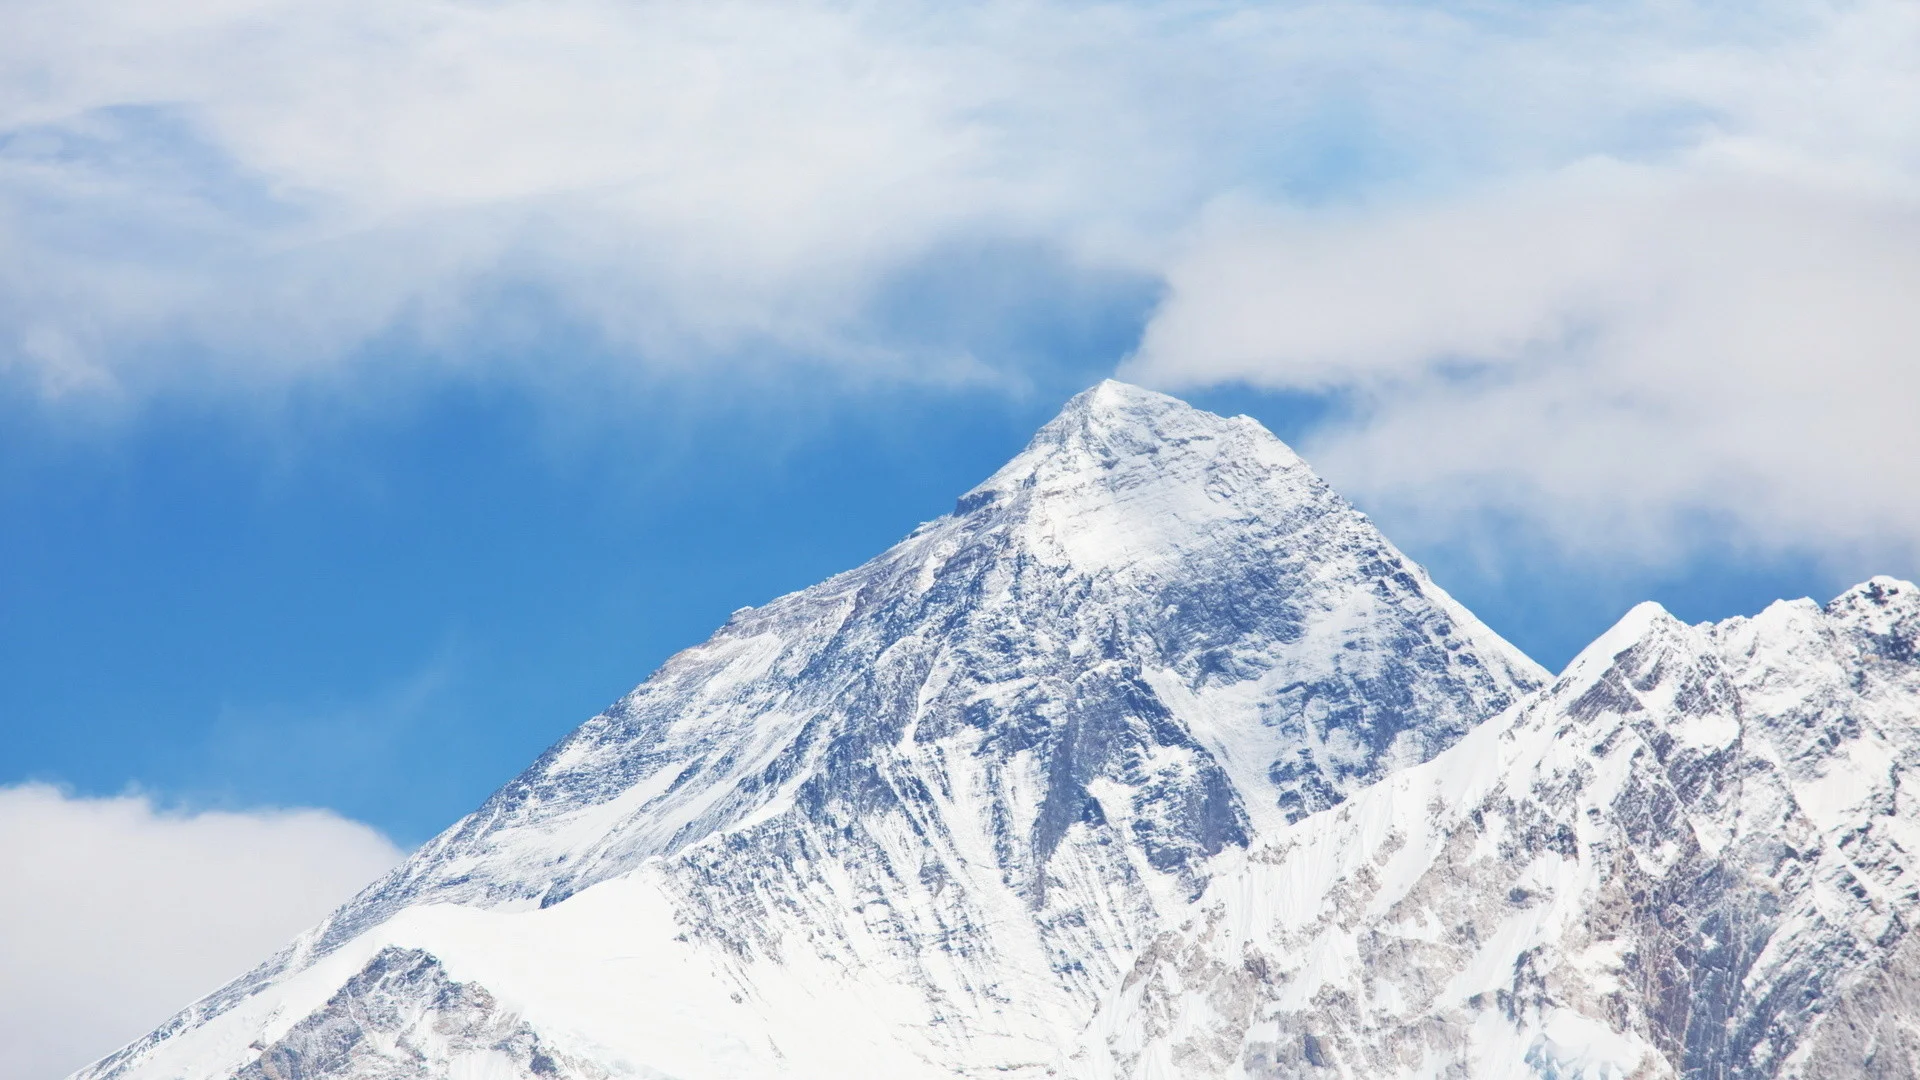 200+ Mount Everest Images & Wallpapers in HD - Pixabay